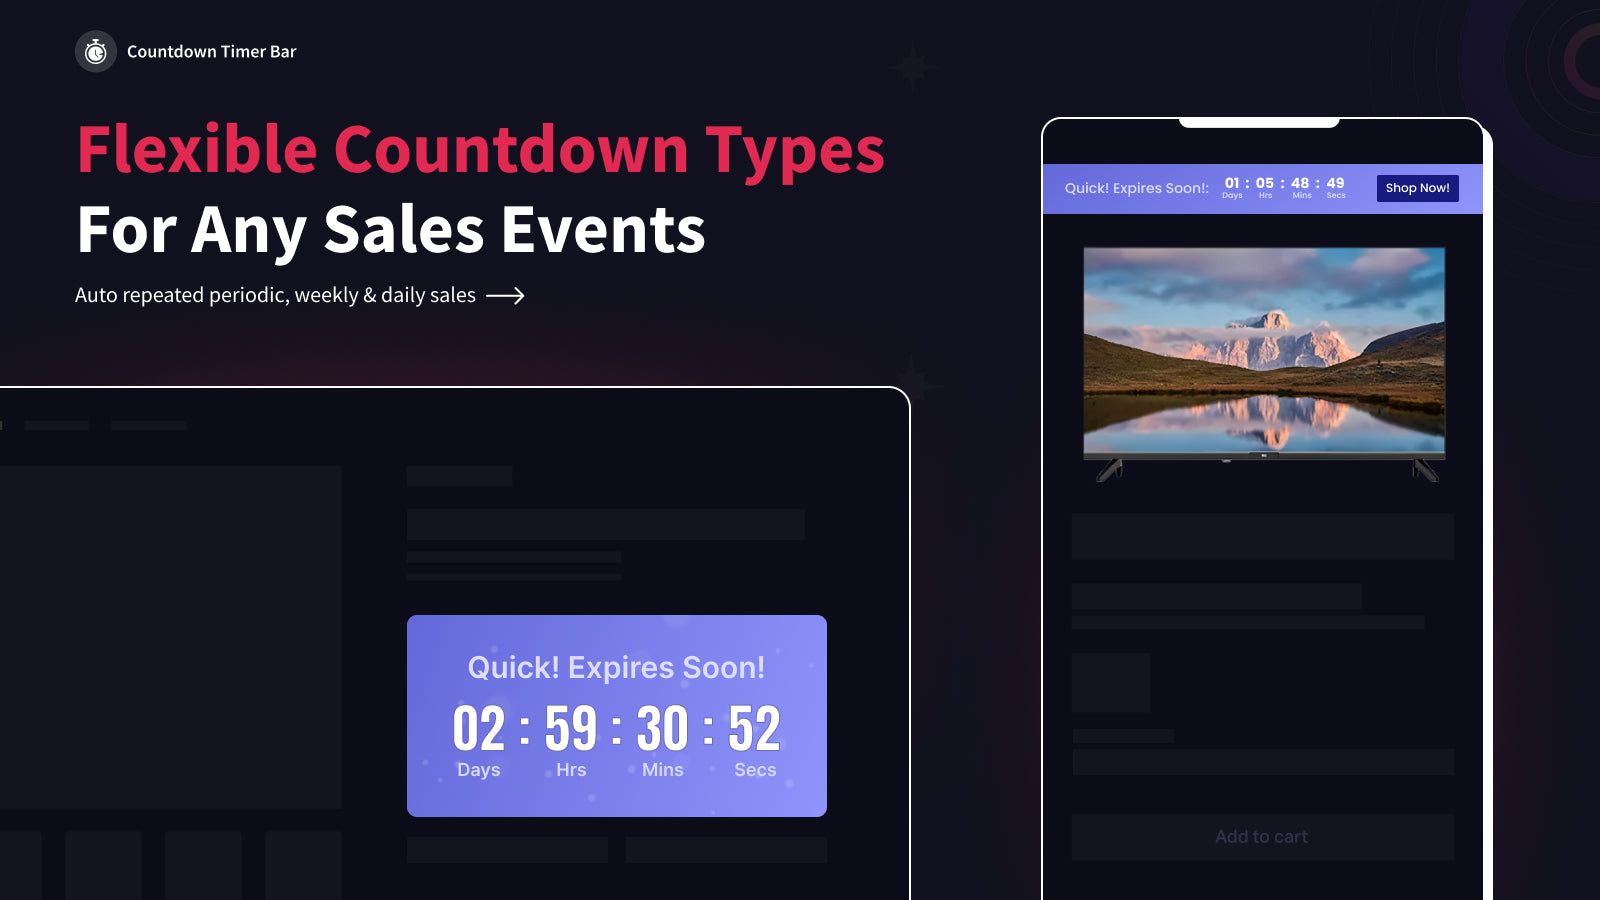 Countdown types for any sales event